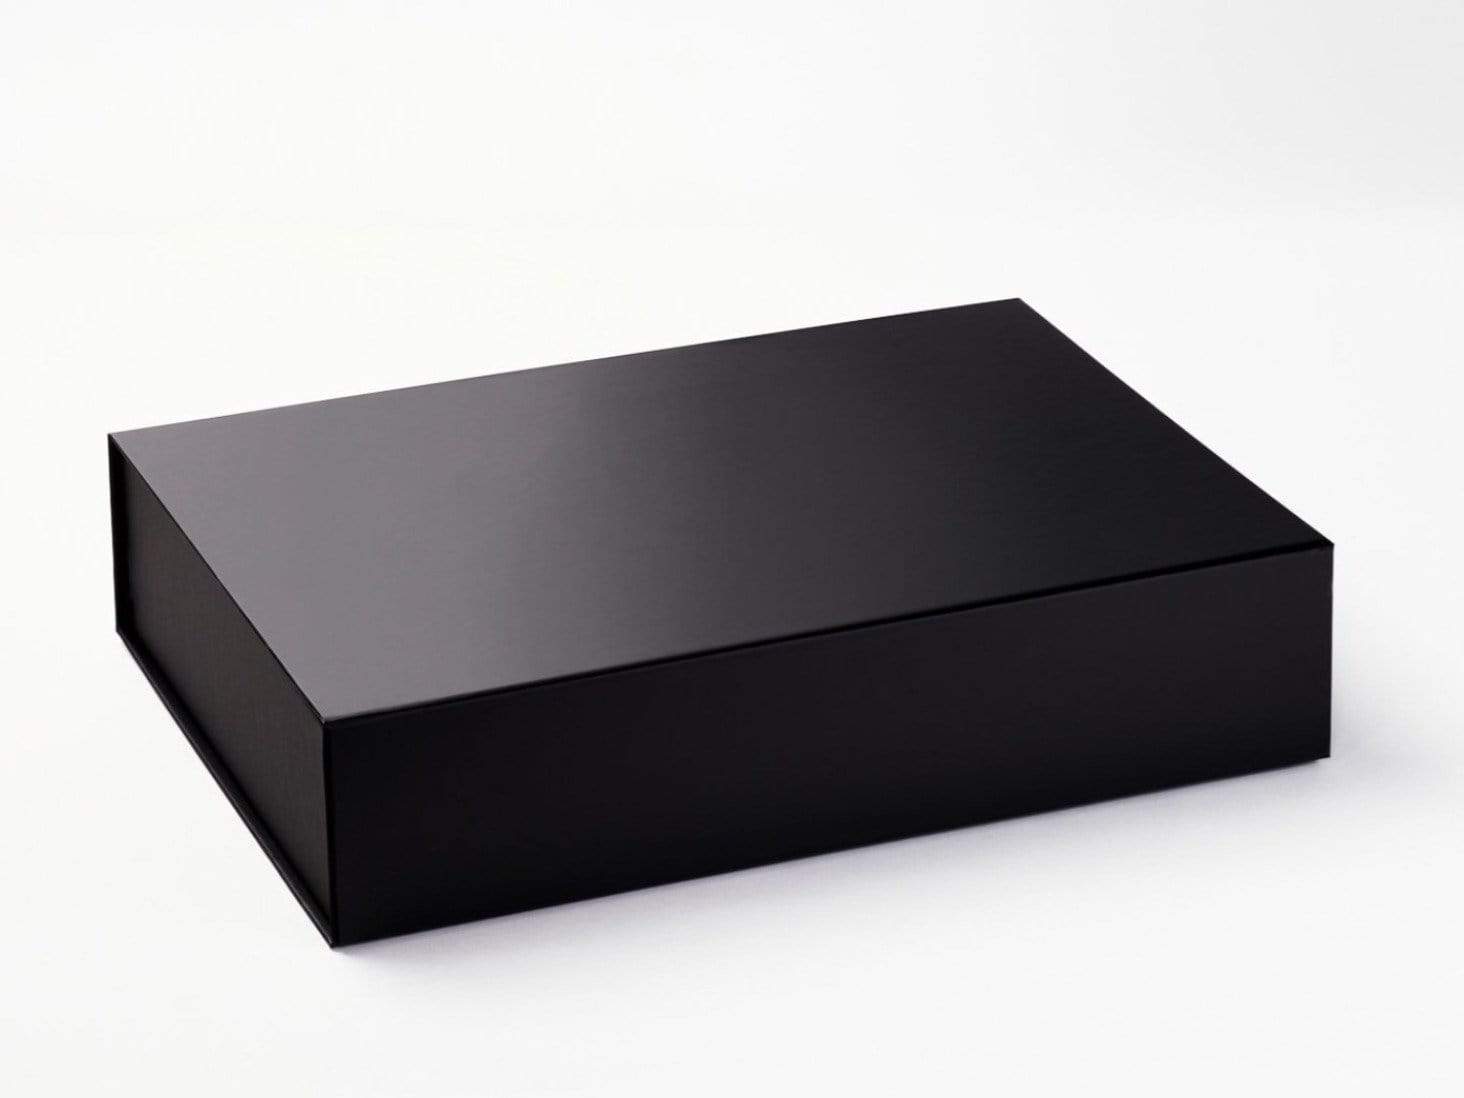 Luxury Black Packaging Box Set, Two Part Cardboard Packing Boxes With Lids,  Small Matte Boxes for Jewelry, Accessories or Gifts 